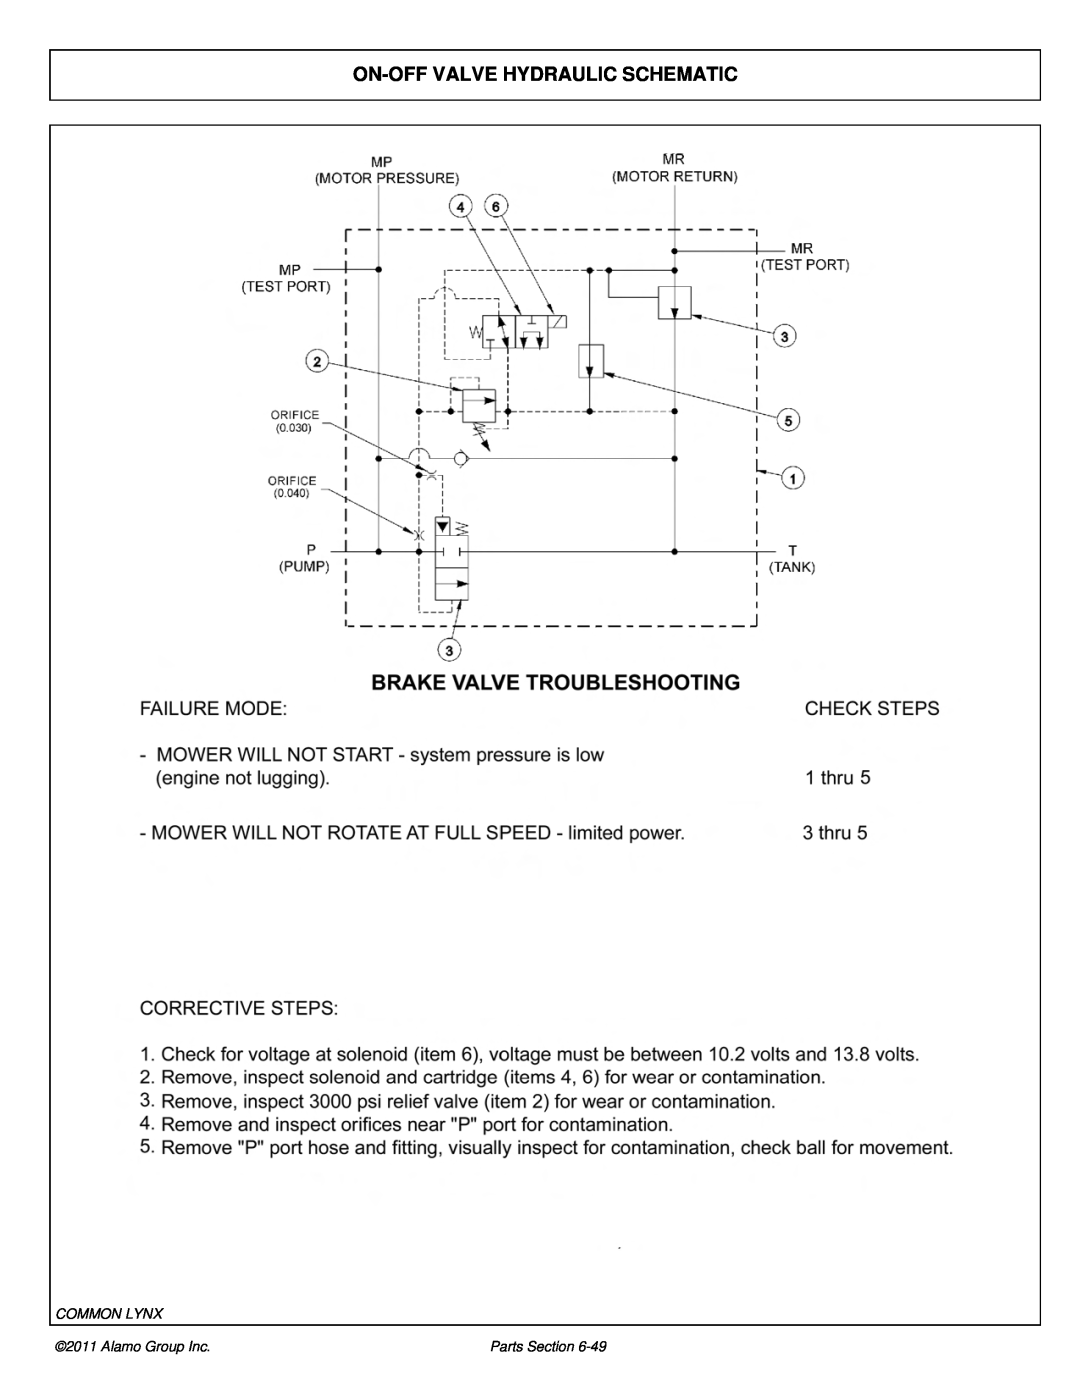 Tiger Products Co., Ltd 5093E, 5083E, 5101E On-Offvalve Hydraulic Schematic, Common Lynx, Alamo Group Inc, Parts Section 